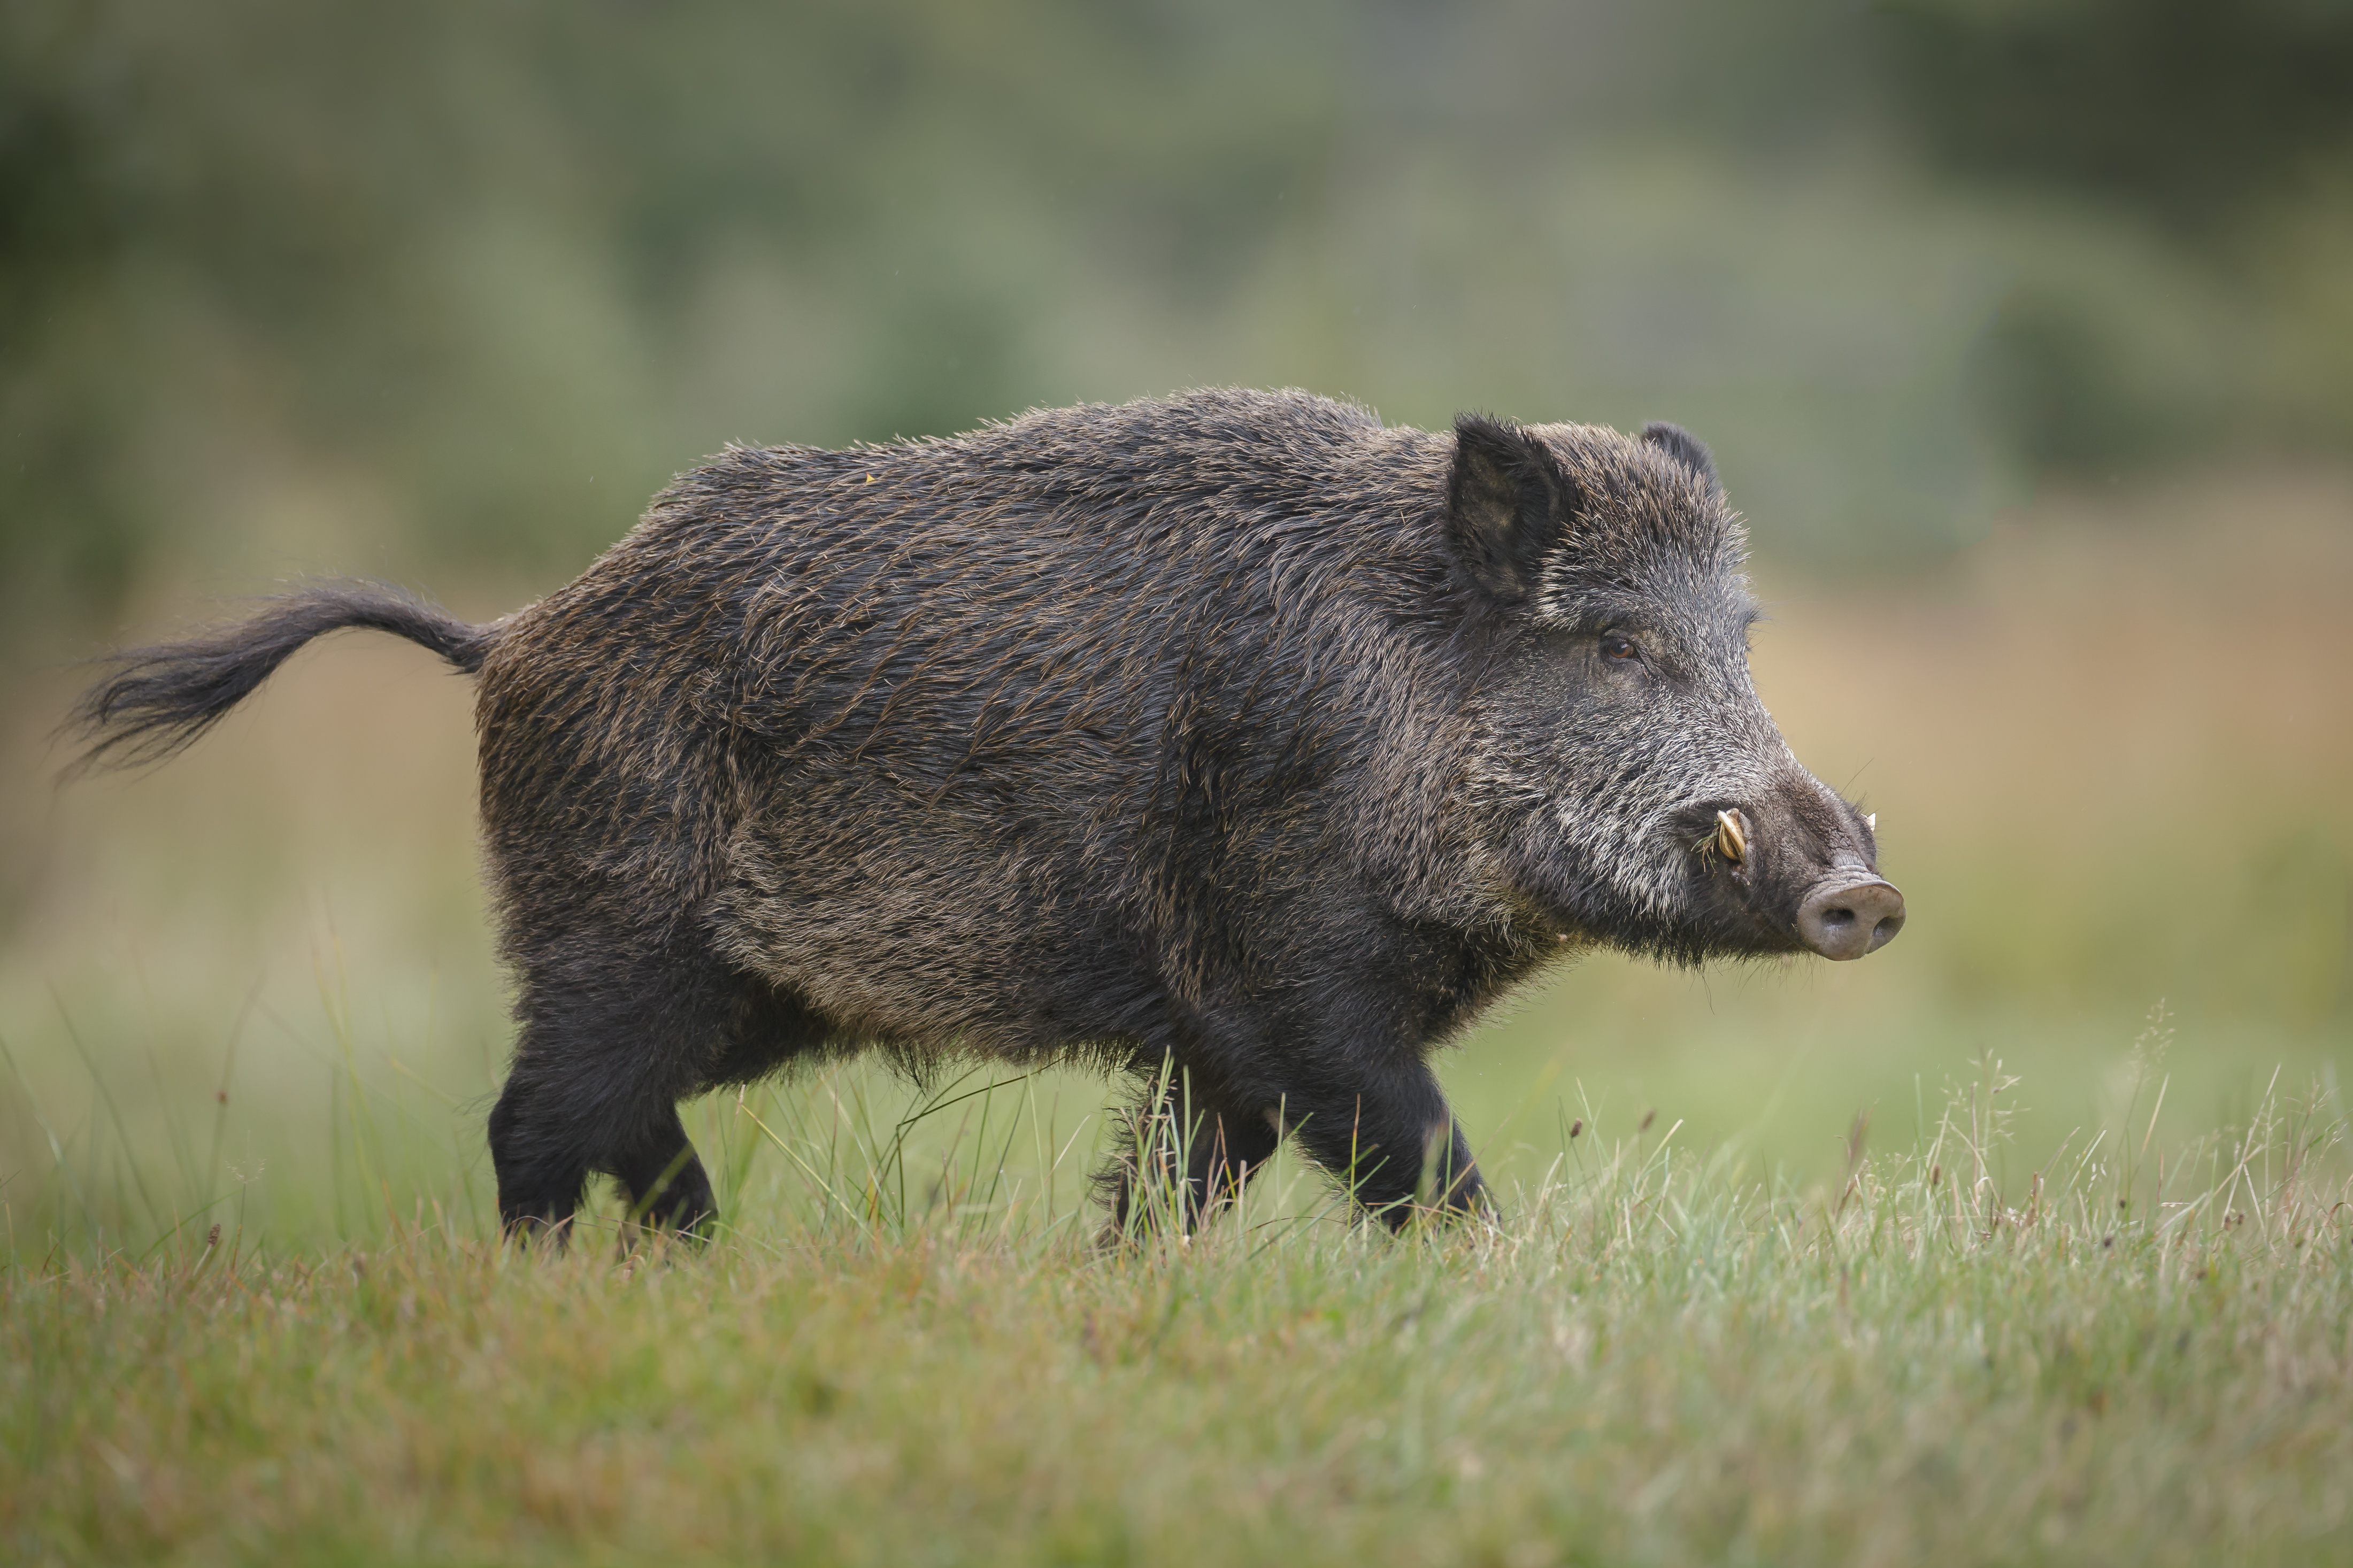 As more and more people get into feral pig hunting, the most... wild pig hu...